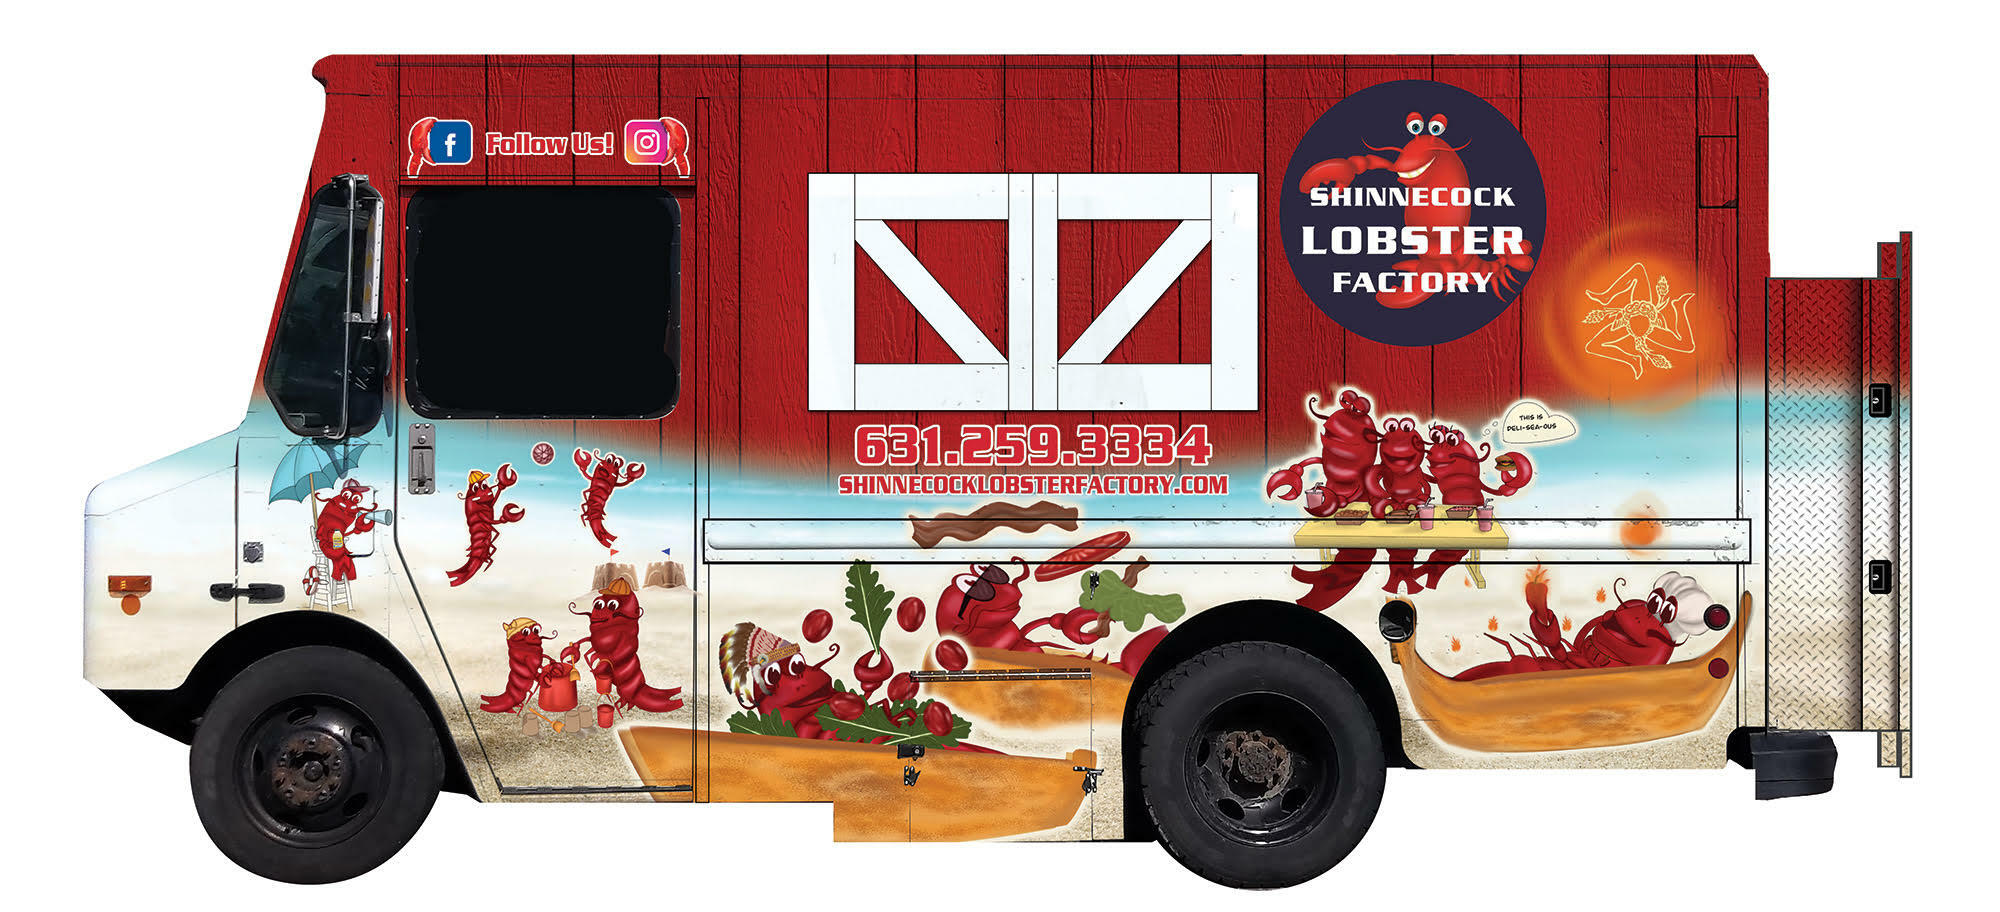 The Shinnecock Lobster Factory's newly launched Lobster Roll Food Truck will be rolling soon. COURTESY THE SHINNECOCK LOBSTER FACTORY